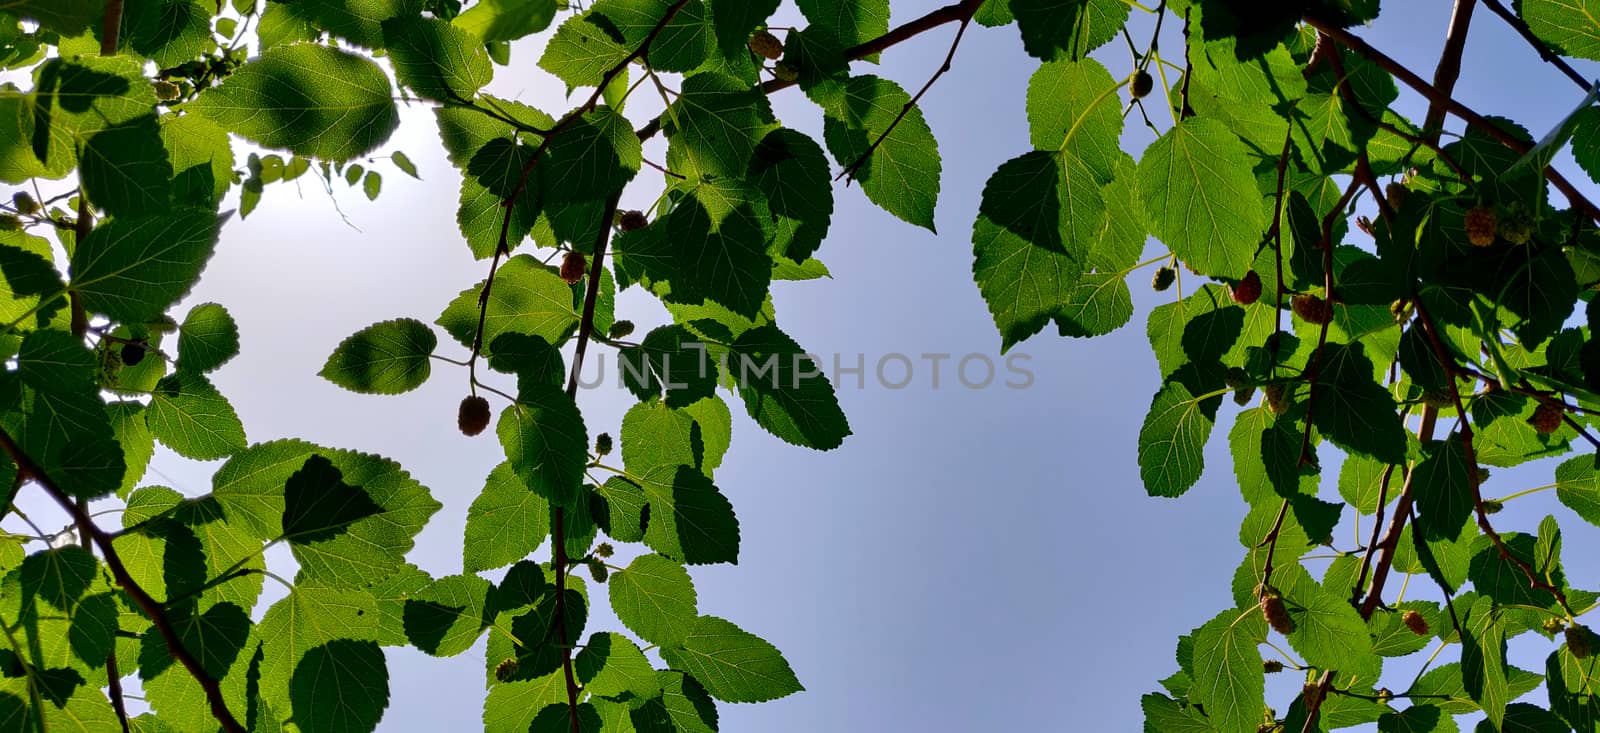 Mulberry tree leaves against sun in afternoon daylight by mshivangi92